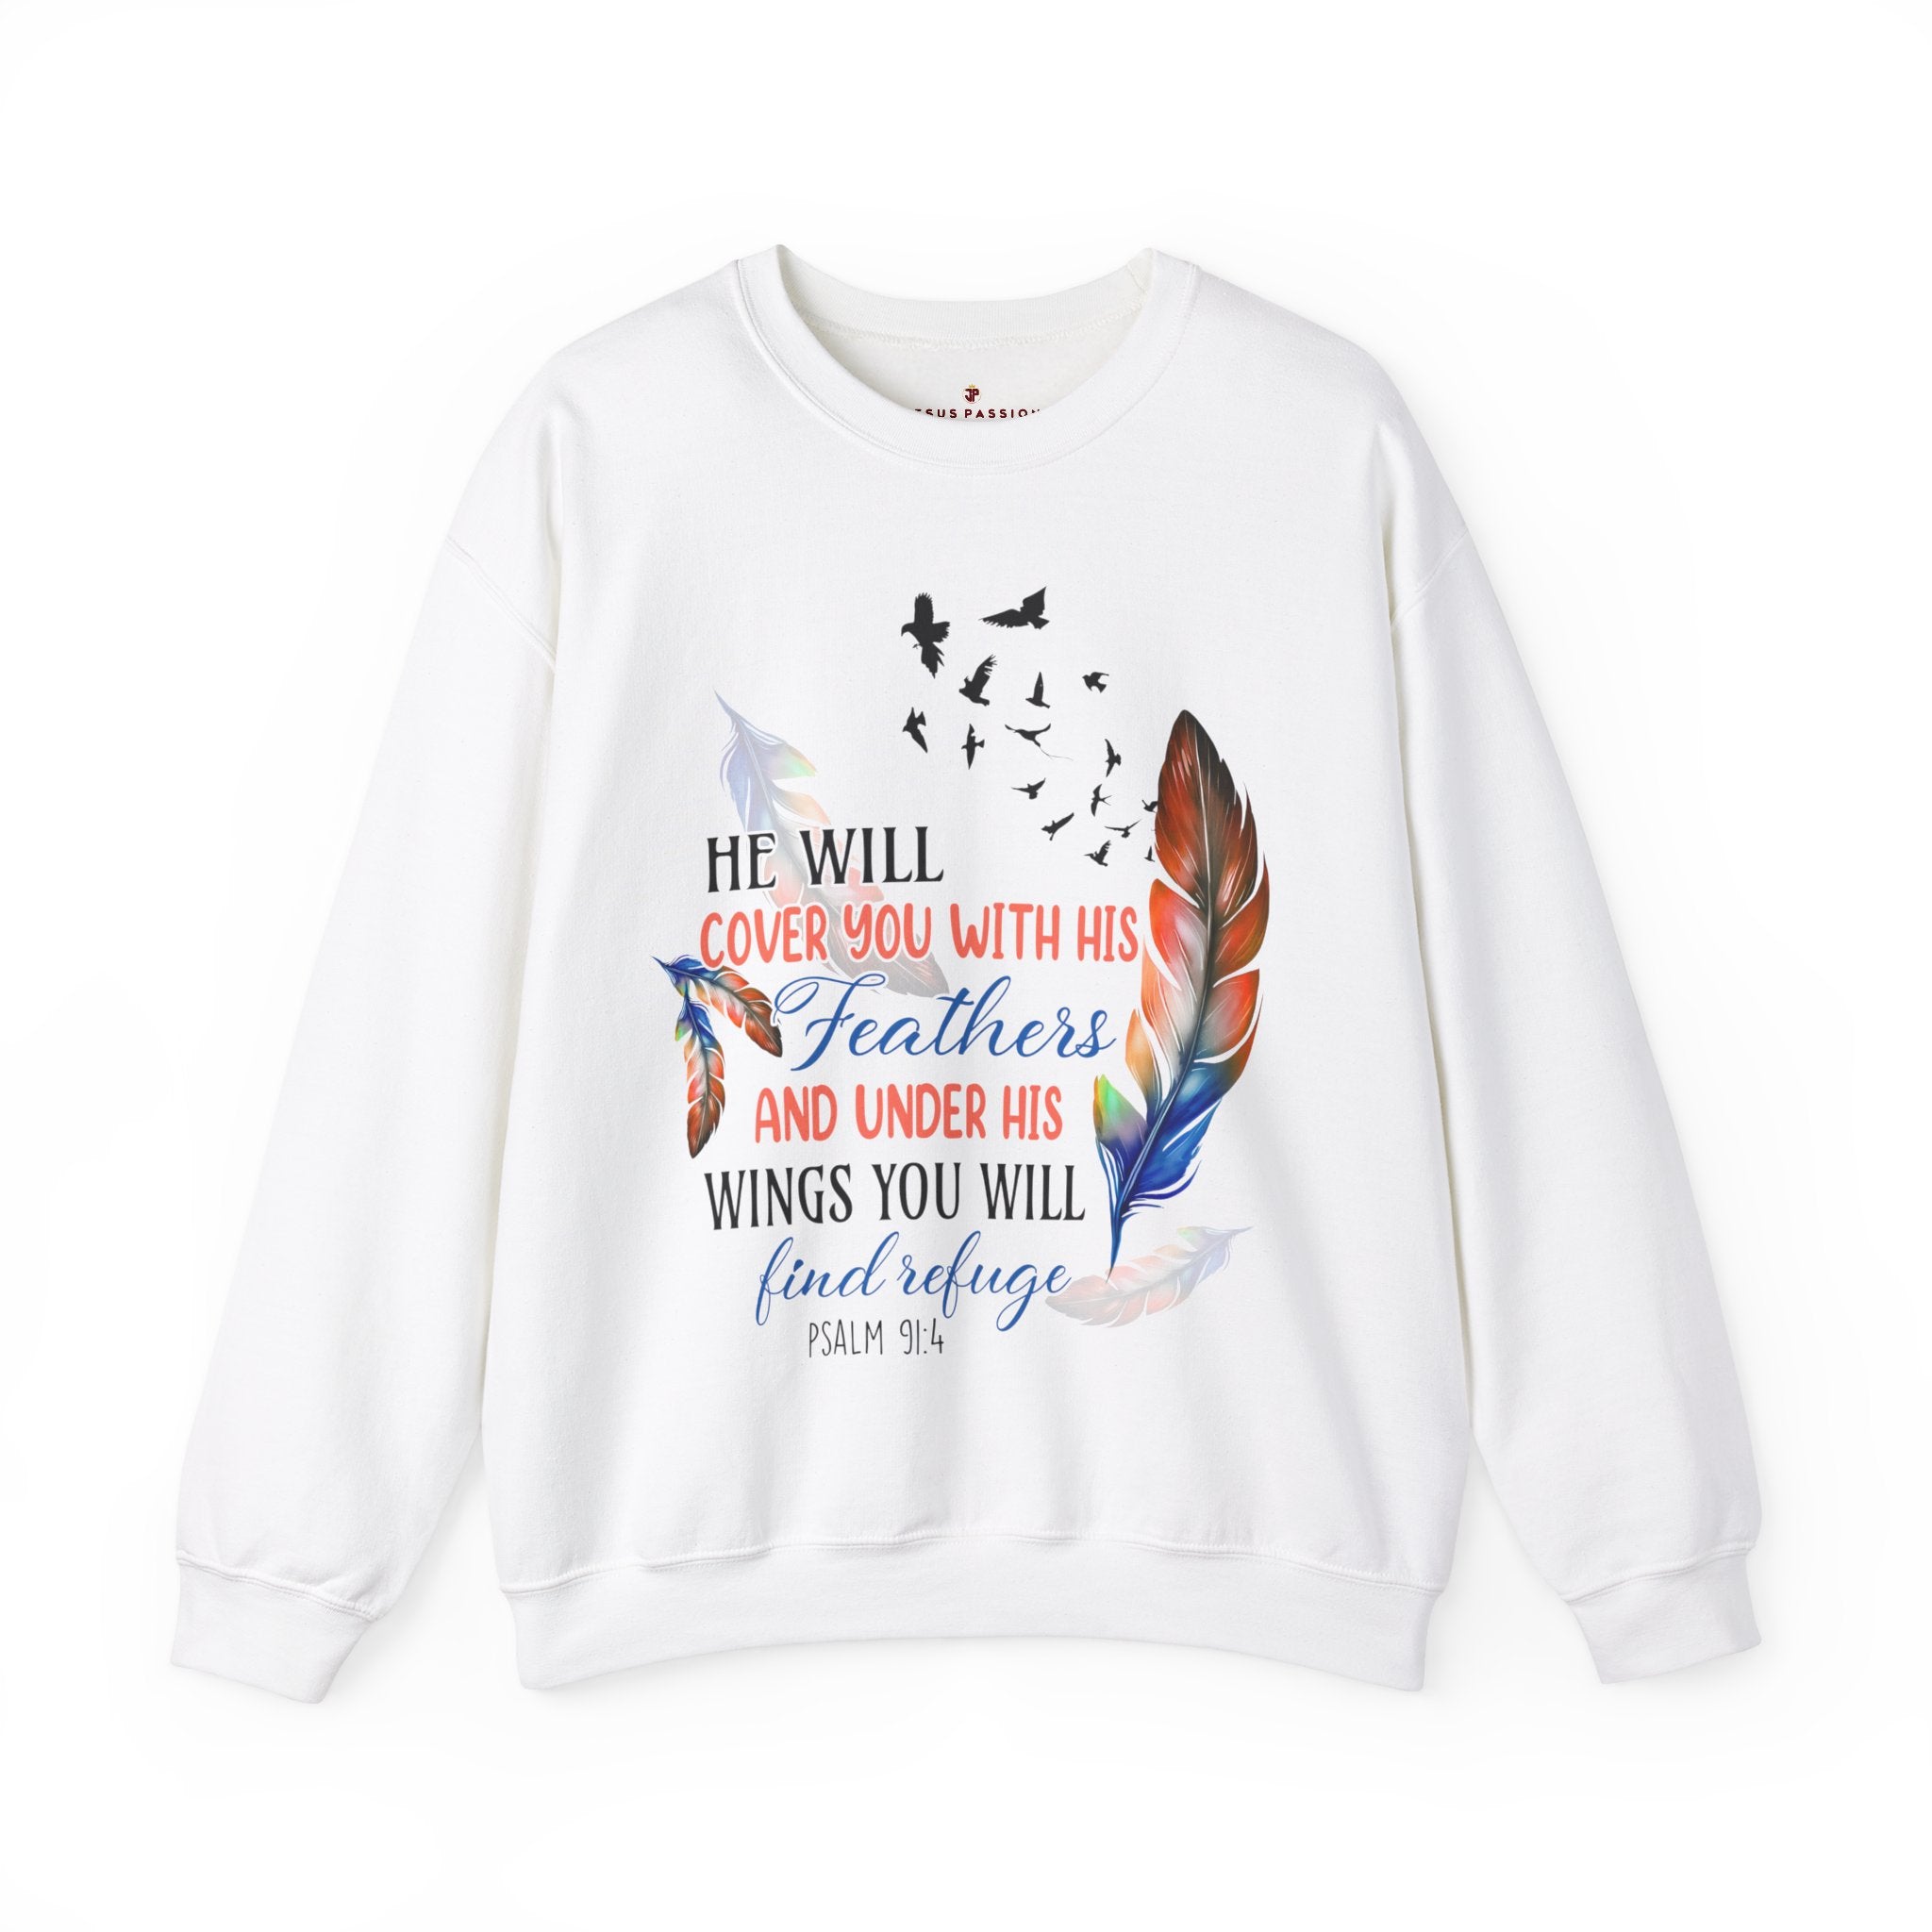 He Will Cover you with Feathers Women's Fleece Unisex-Fit Sweatshirt Light Blue / White Size: S Color: White Jesus Passion Apparel